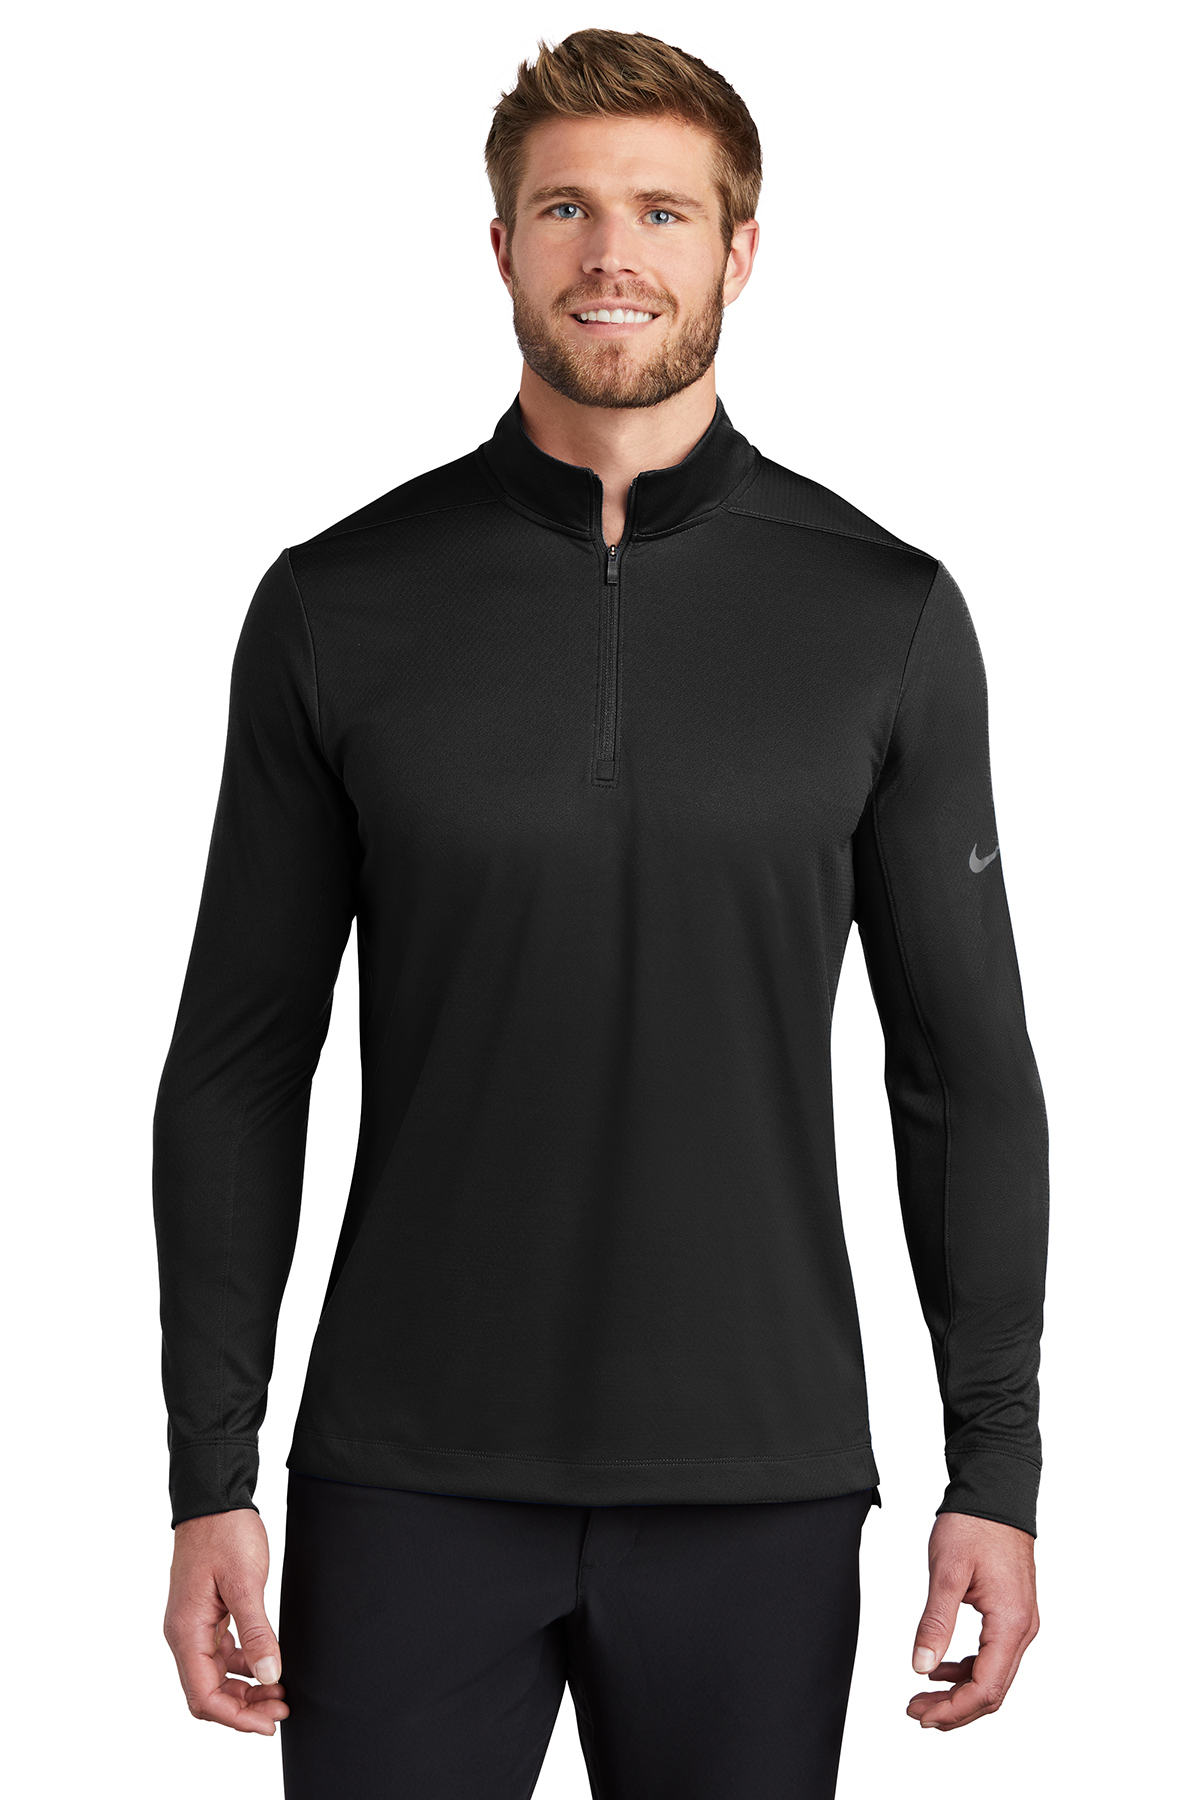 Nike Dry 1/2-Zip Cover-Up - NKBV6044- Logo Shirts Direct